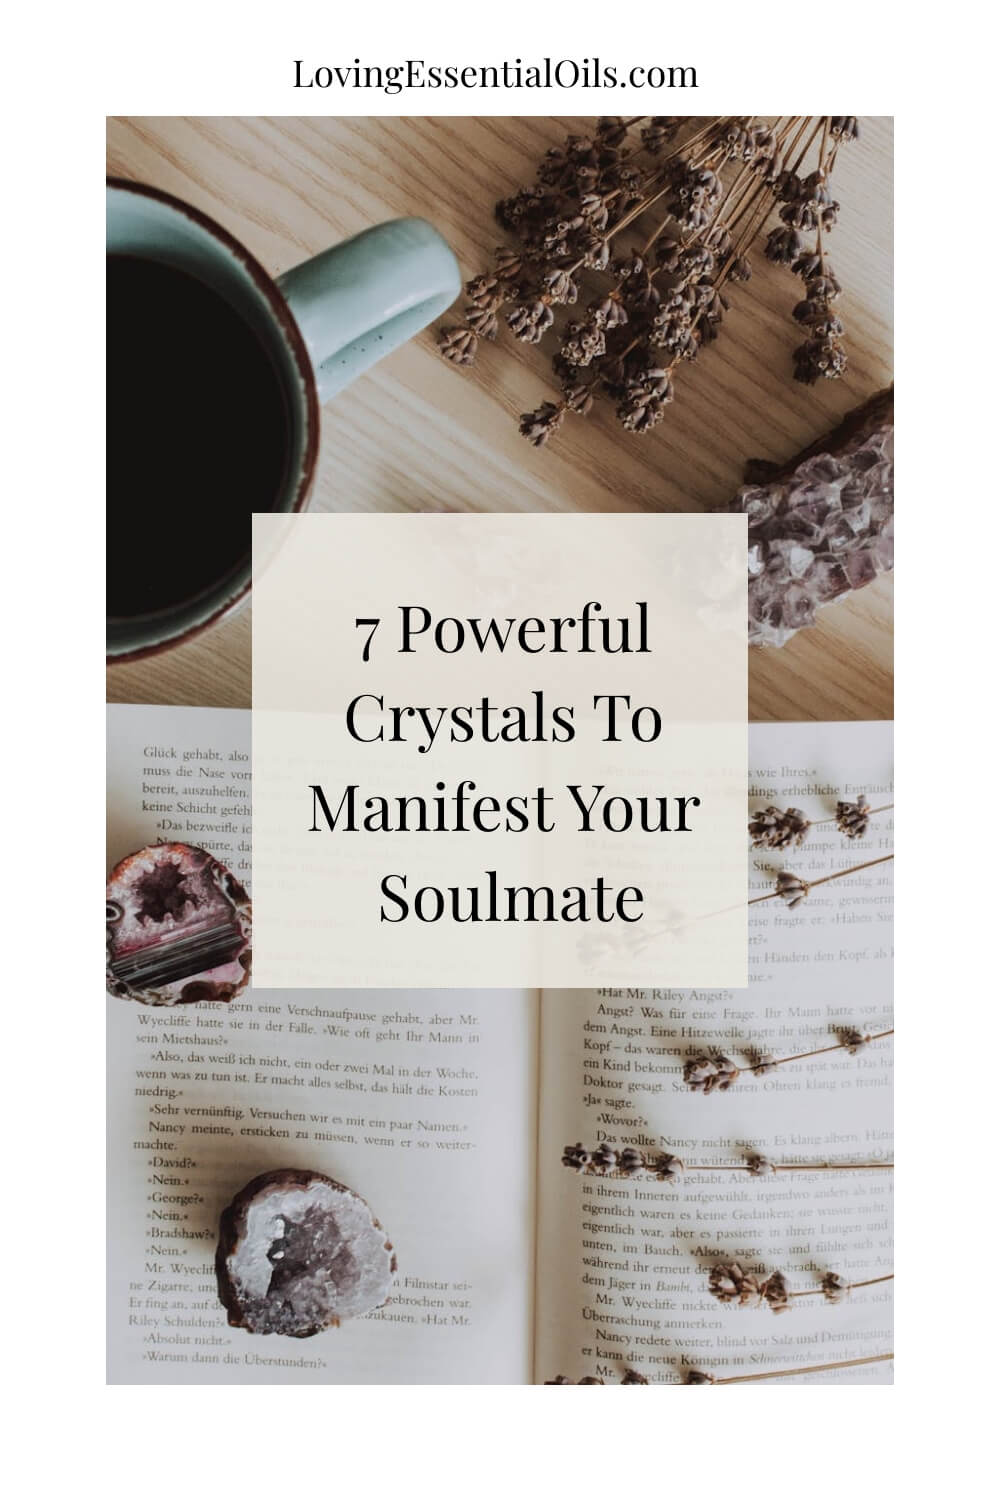 7 Powerful Crystals To Manifest Your Soulmate